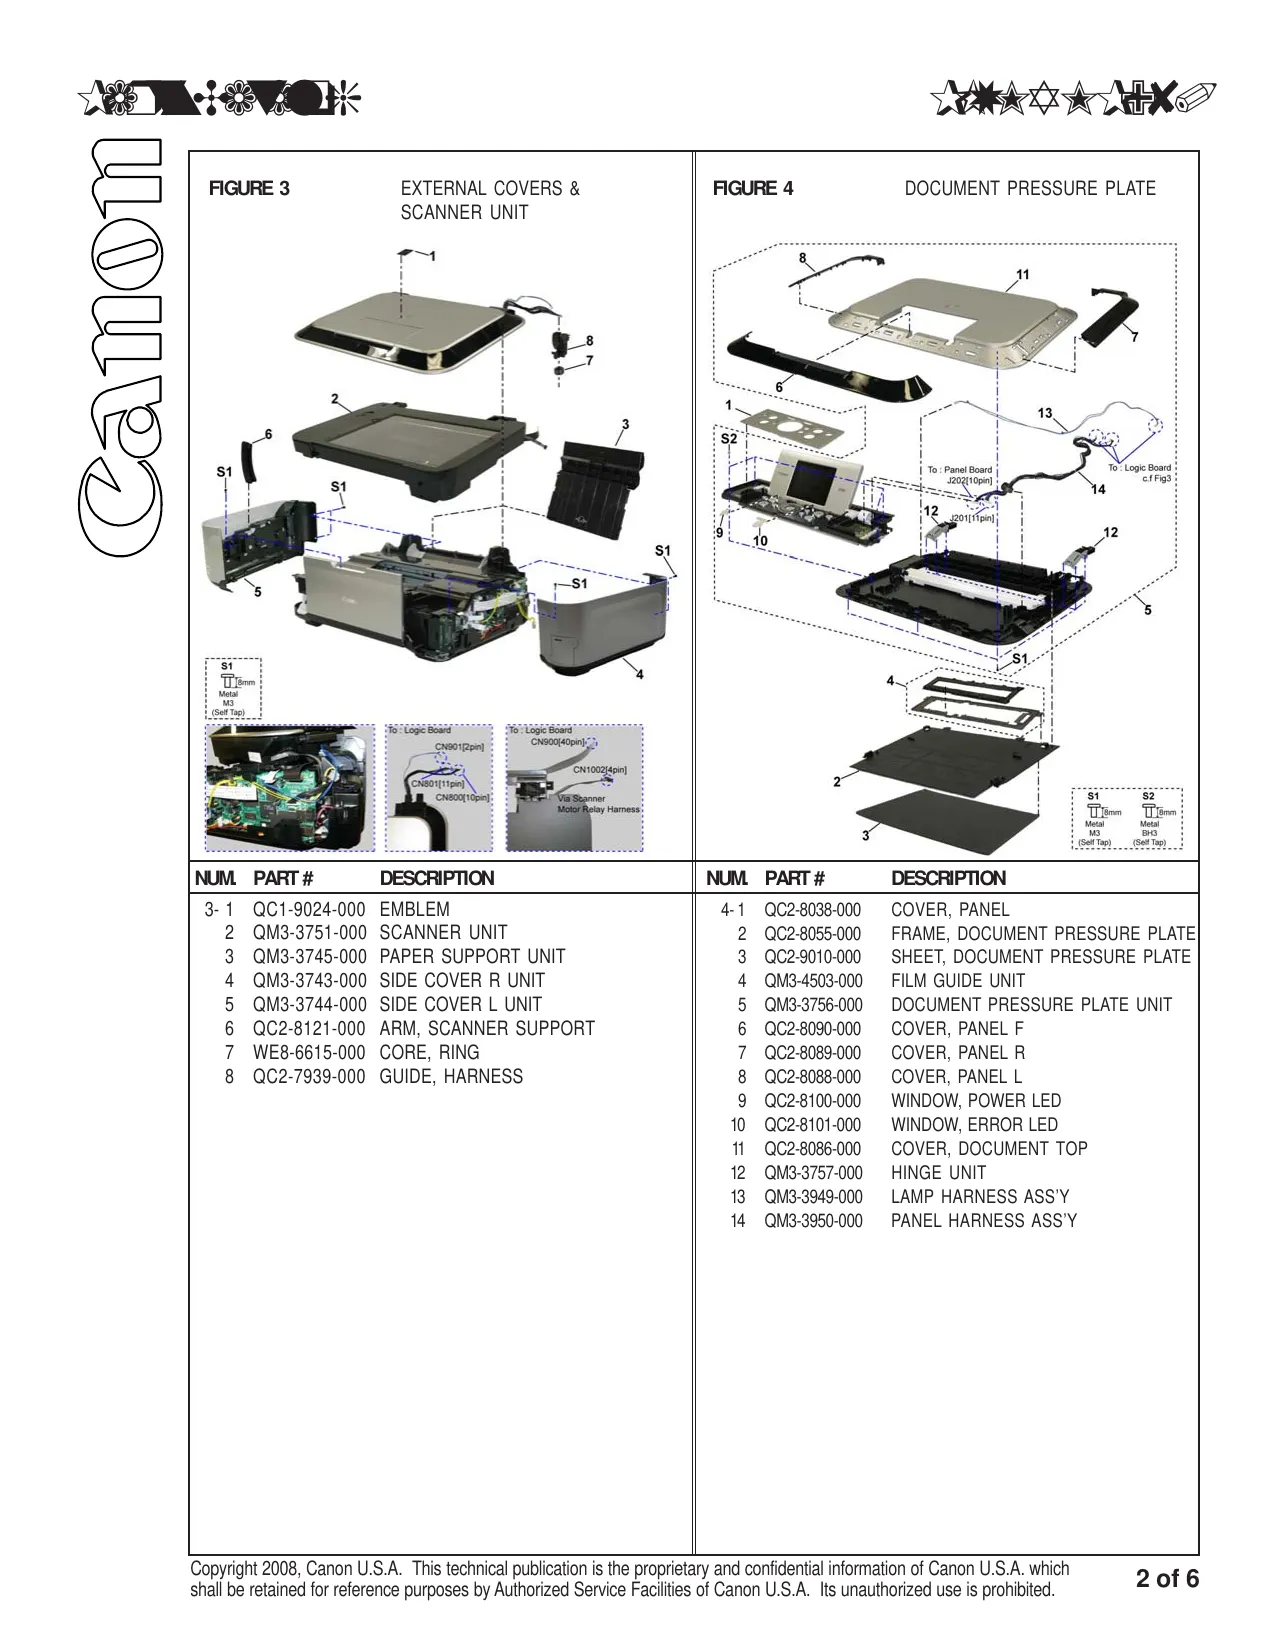 Canon Pixma MP980 multifunction inkjet printer service guide + parts catalog Preview image 3